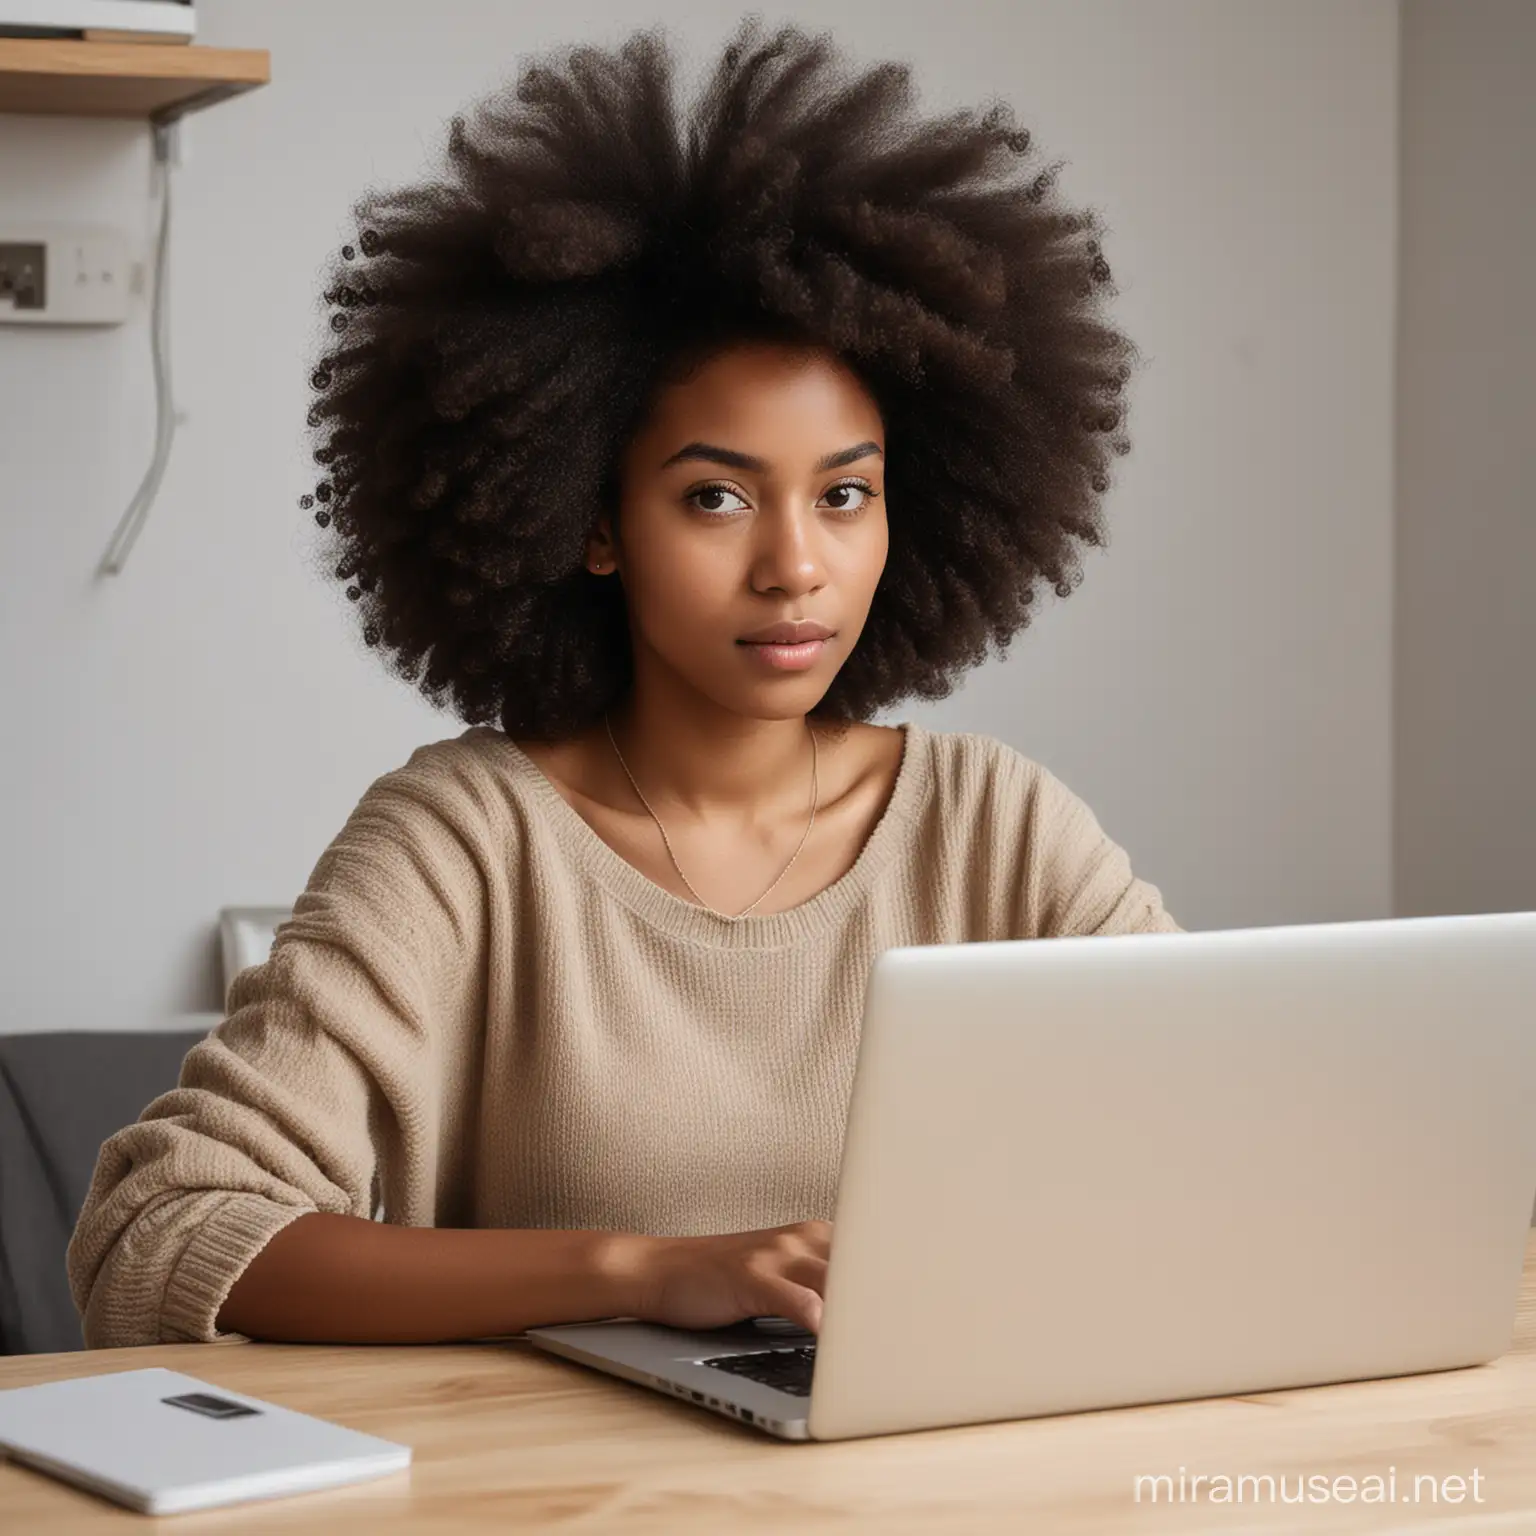 Black girl with an afro using a laptop